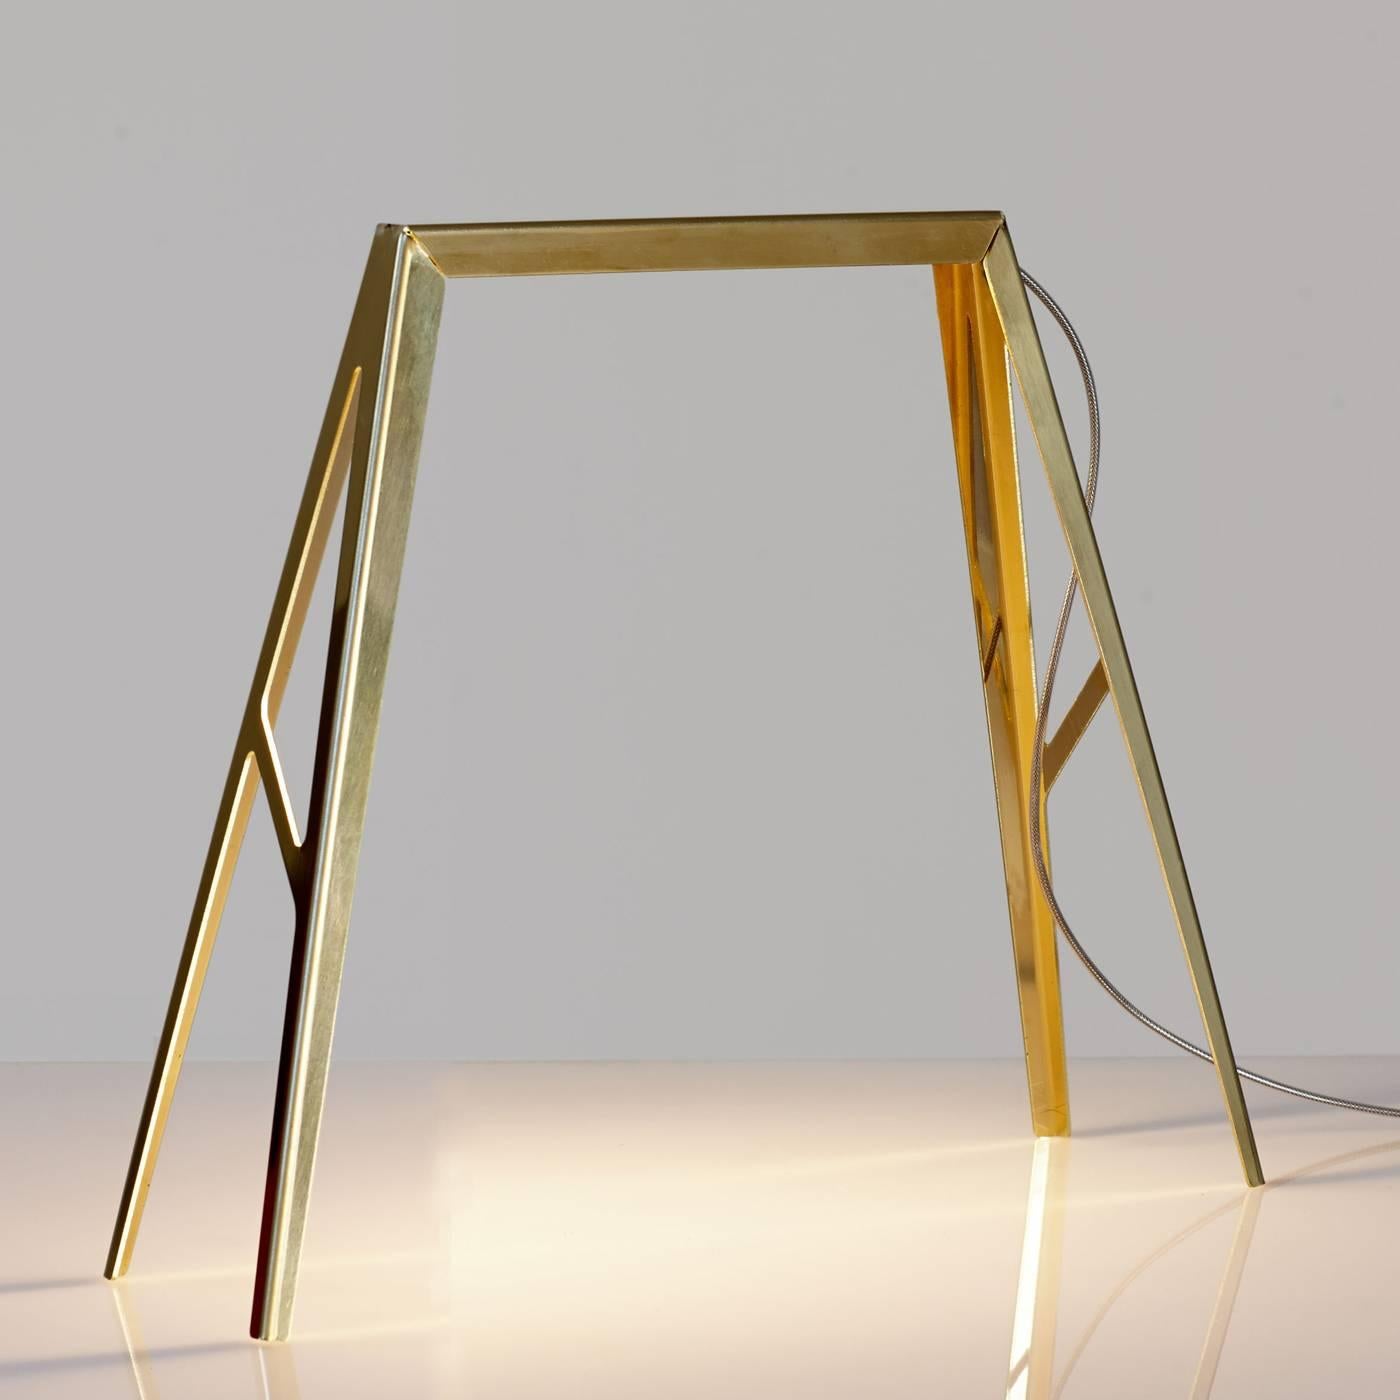 This unique lamp is crafted using brass sheets that have been cut by lasers and later bent to achieve this striking shape that resembles a bridge whose top hides a LED strip. The natural glow of the brass can attract light even when the lamp is not